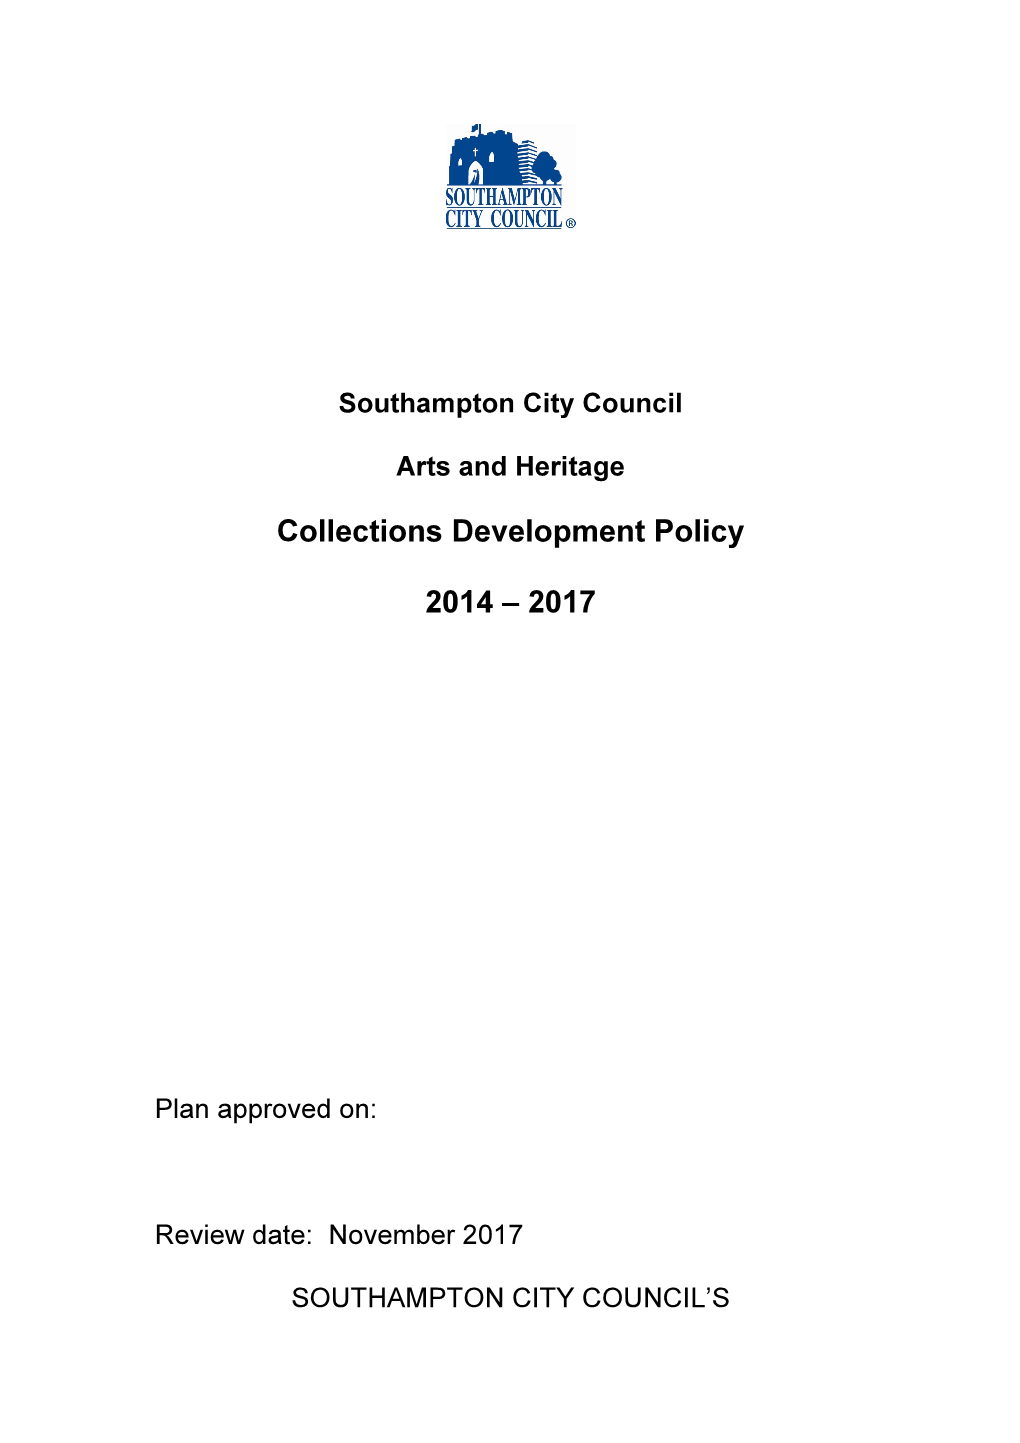 Collections Development Policy 2014 – 2017